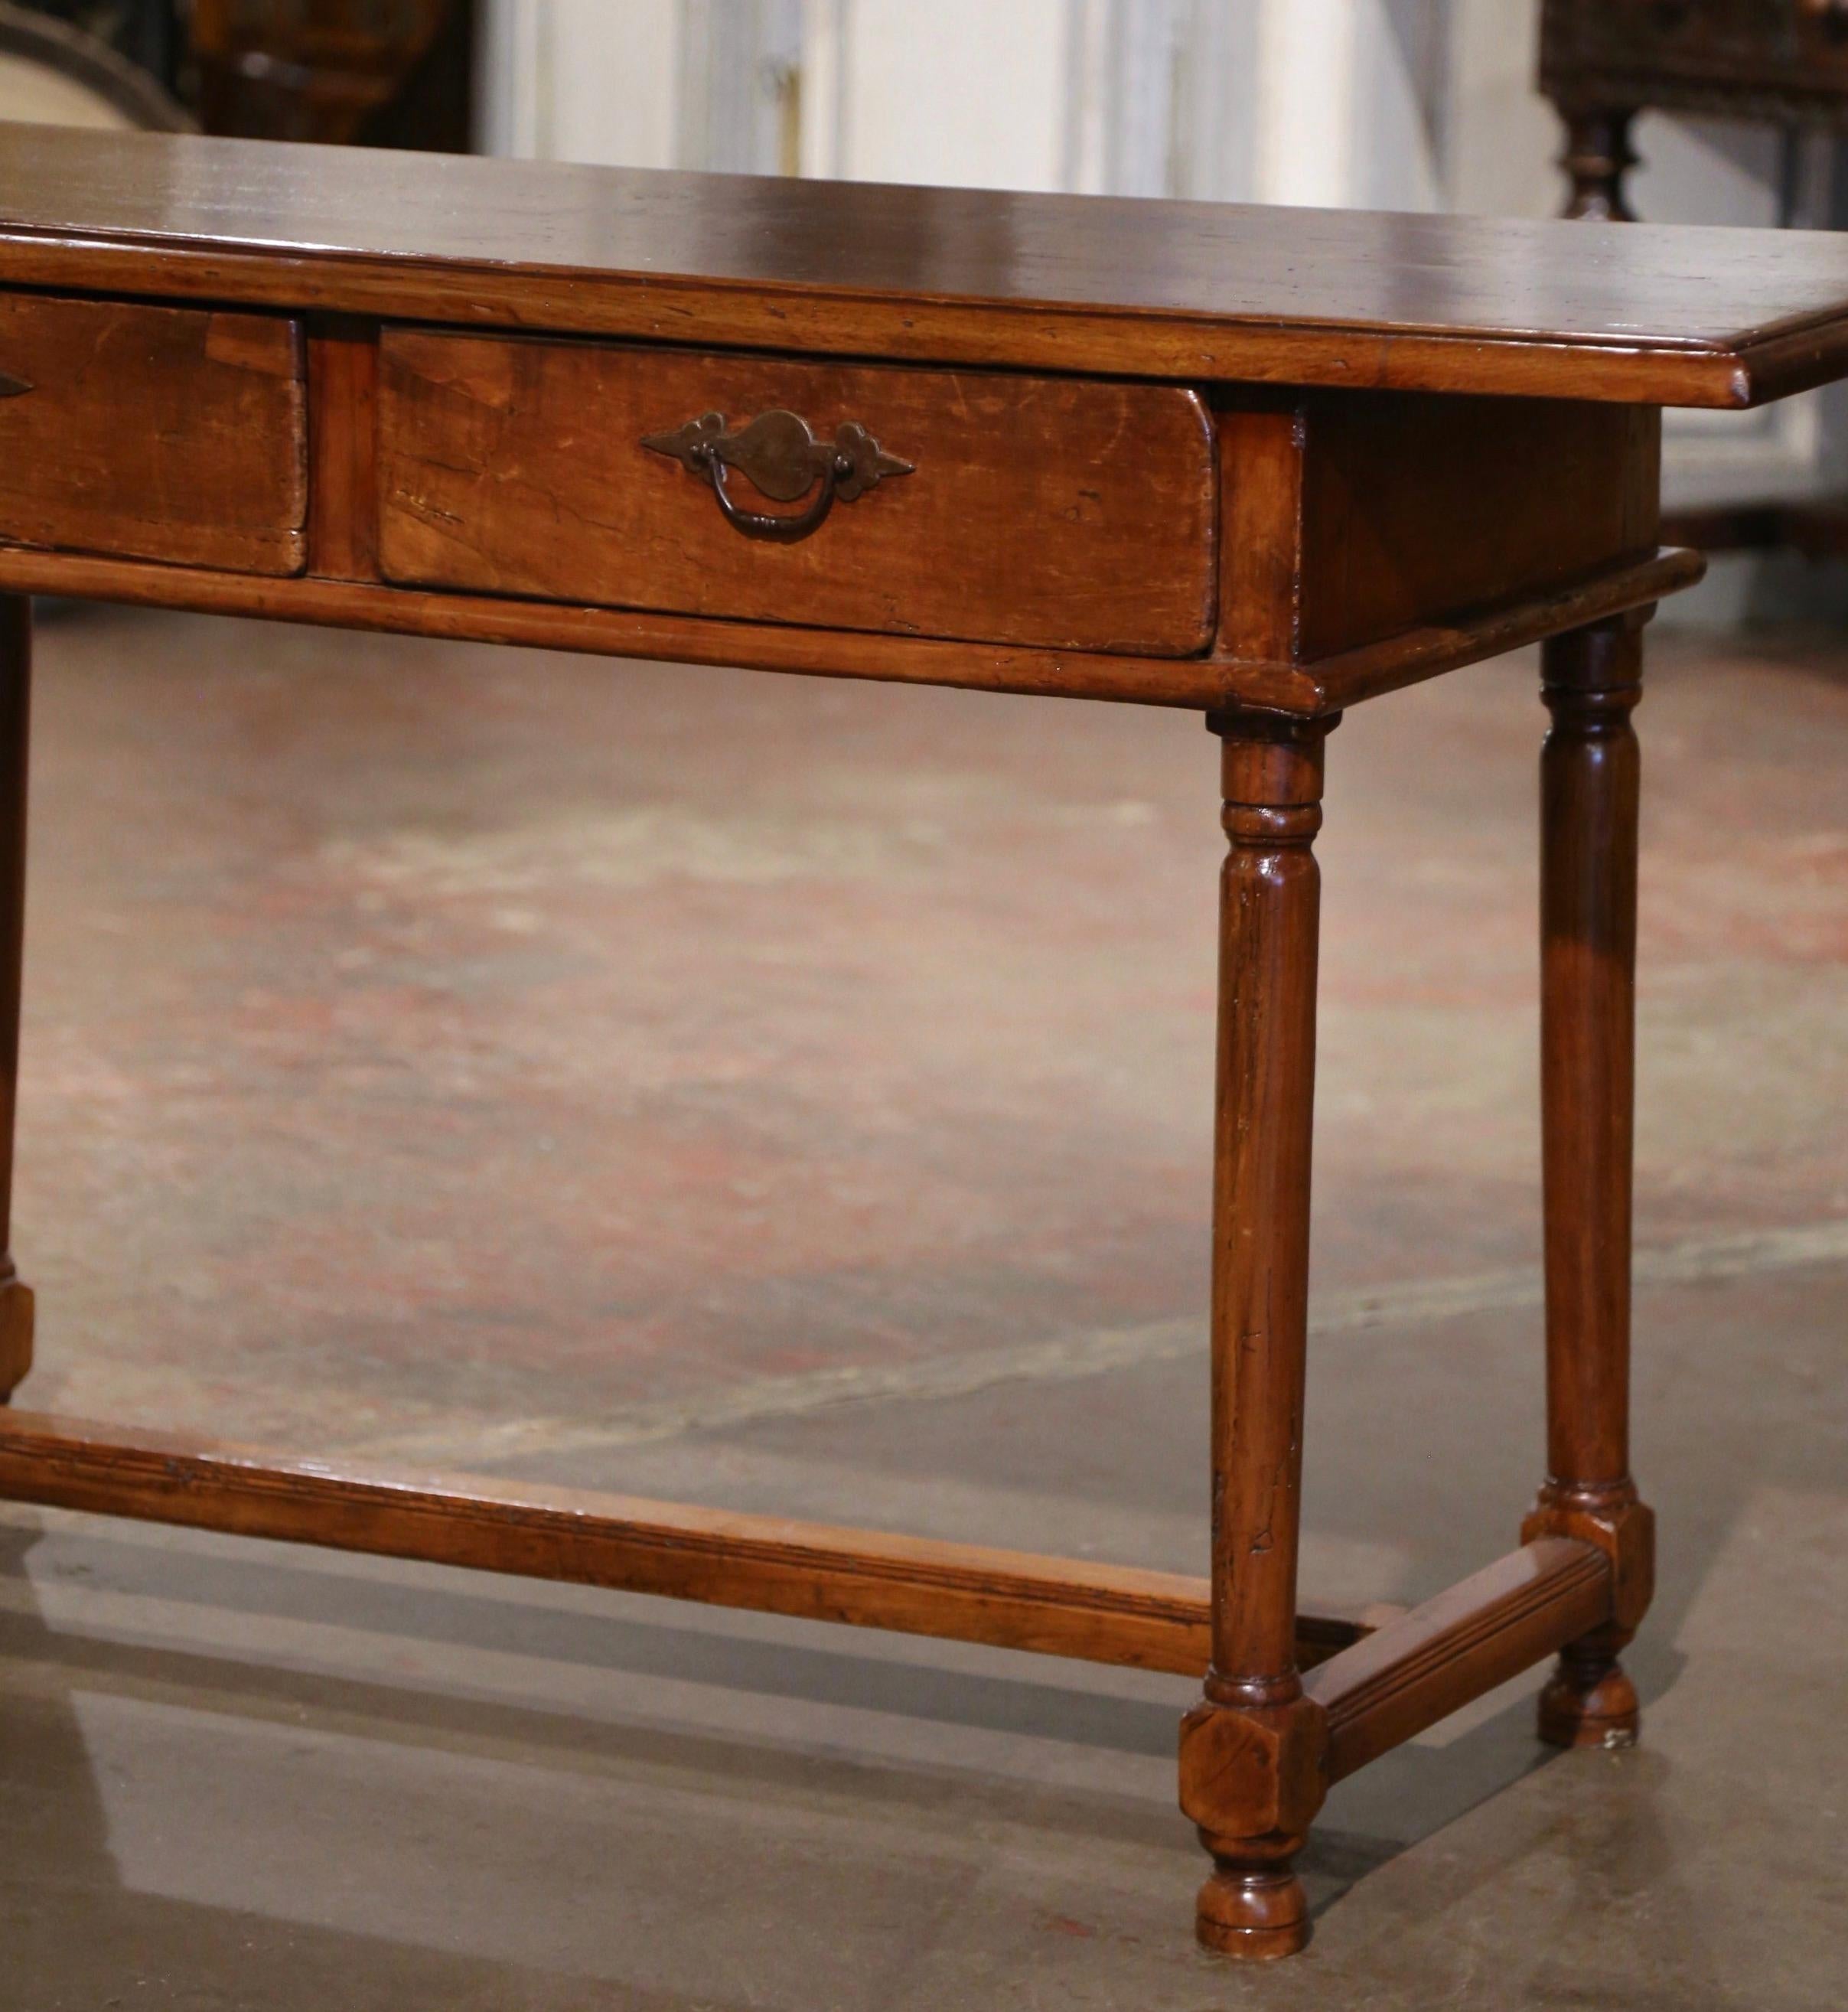 Mid-19th Century French Empire Walnut Console Table with Drawers In Excellent Condition For Sale In Dallas, TX